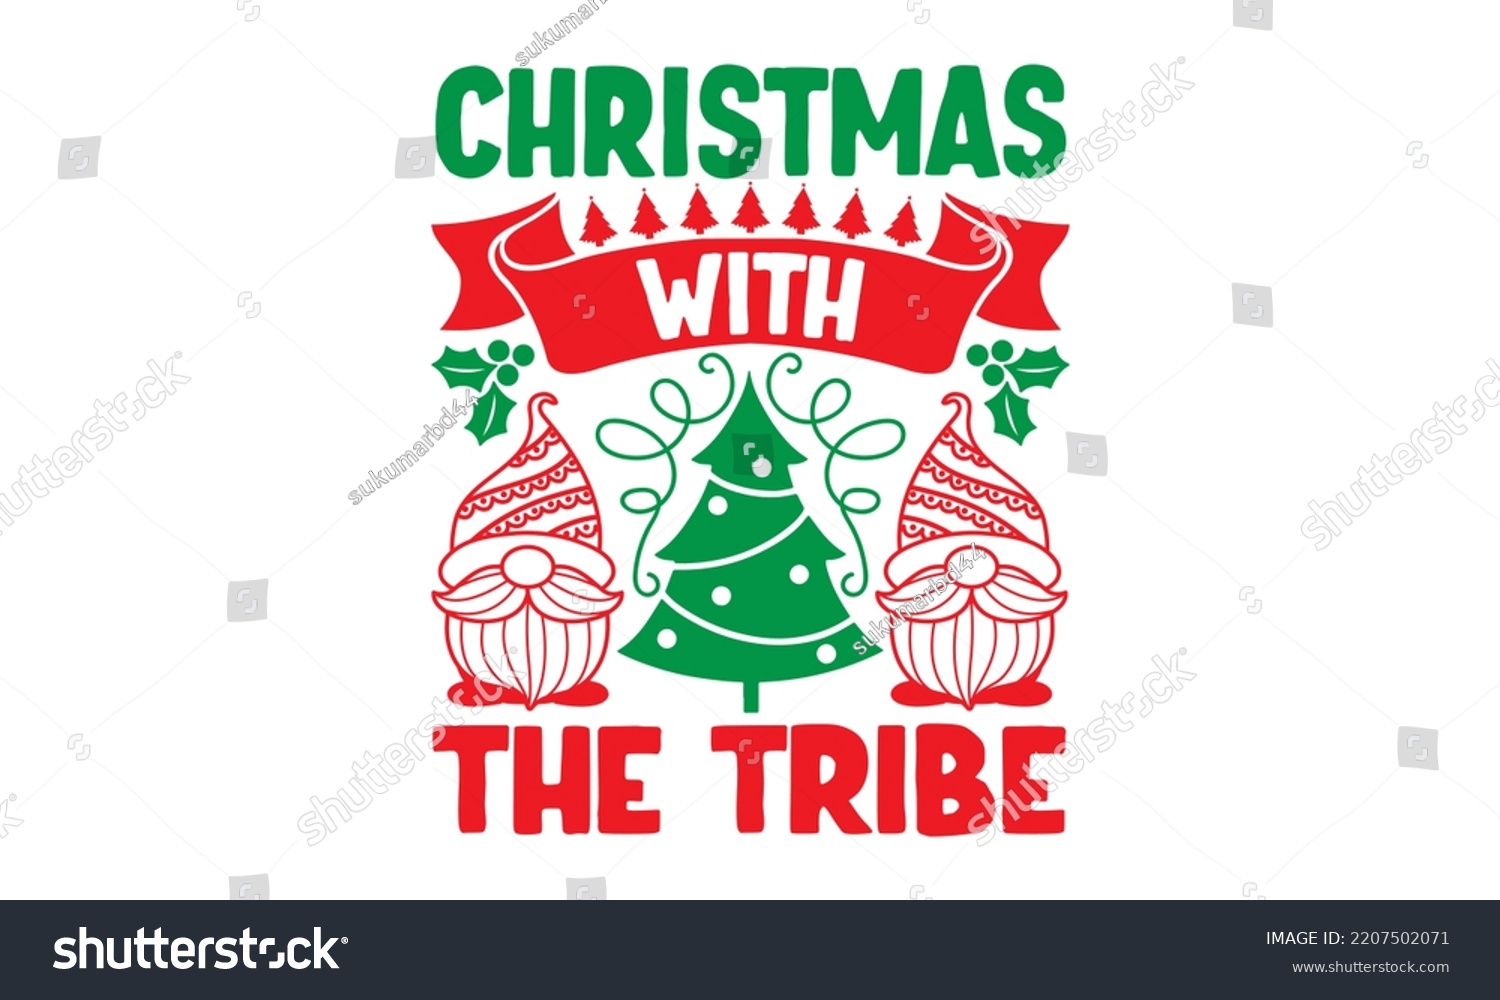 SVG of Christmas With The Tribe - Christmas SVG Design, Hand drawn lettering phrase isolated on white background, Calligraphy T-shirt design, EPS, SVG Files for Cutting, bag, cups, card svg